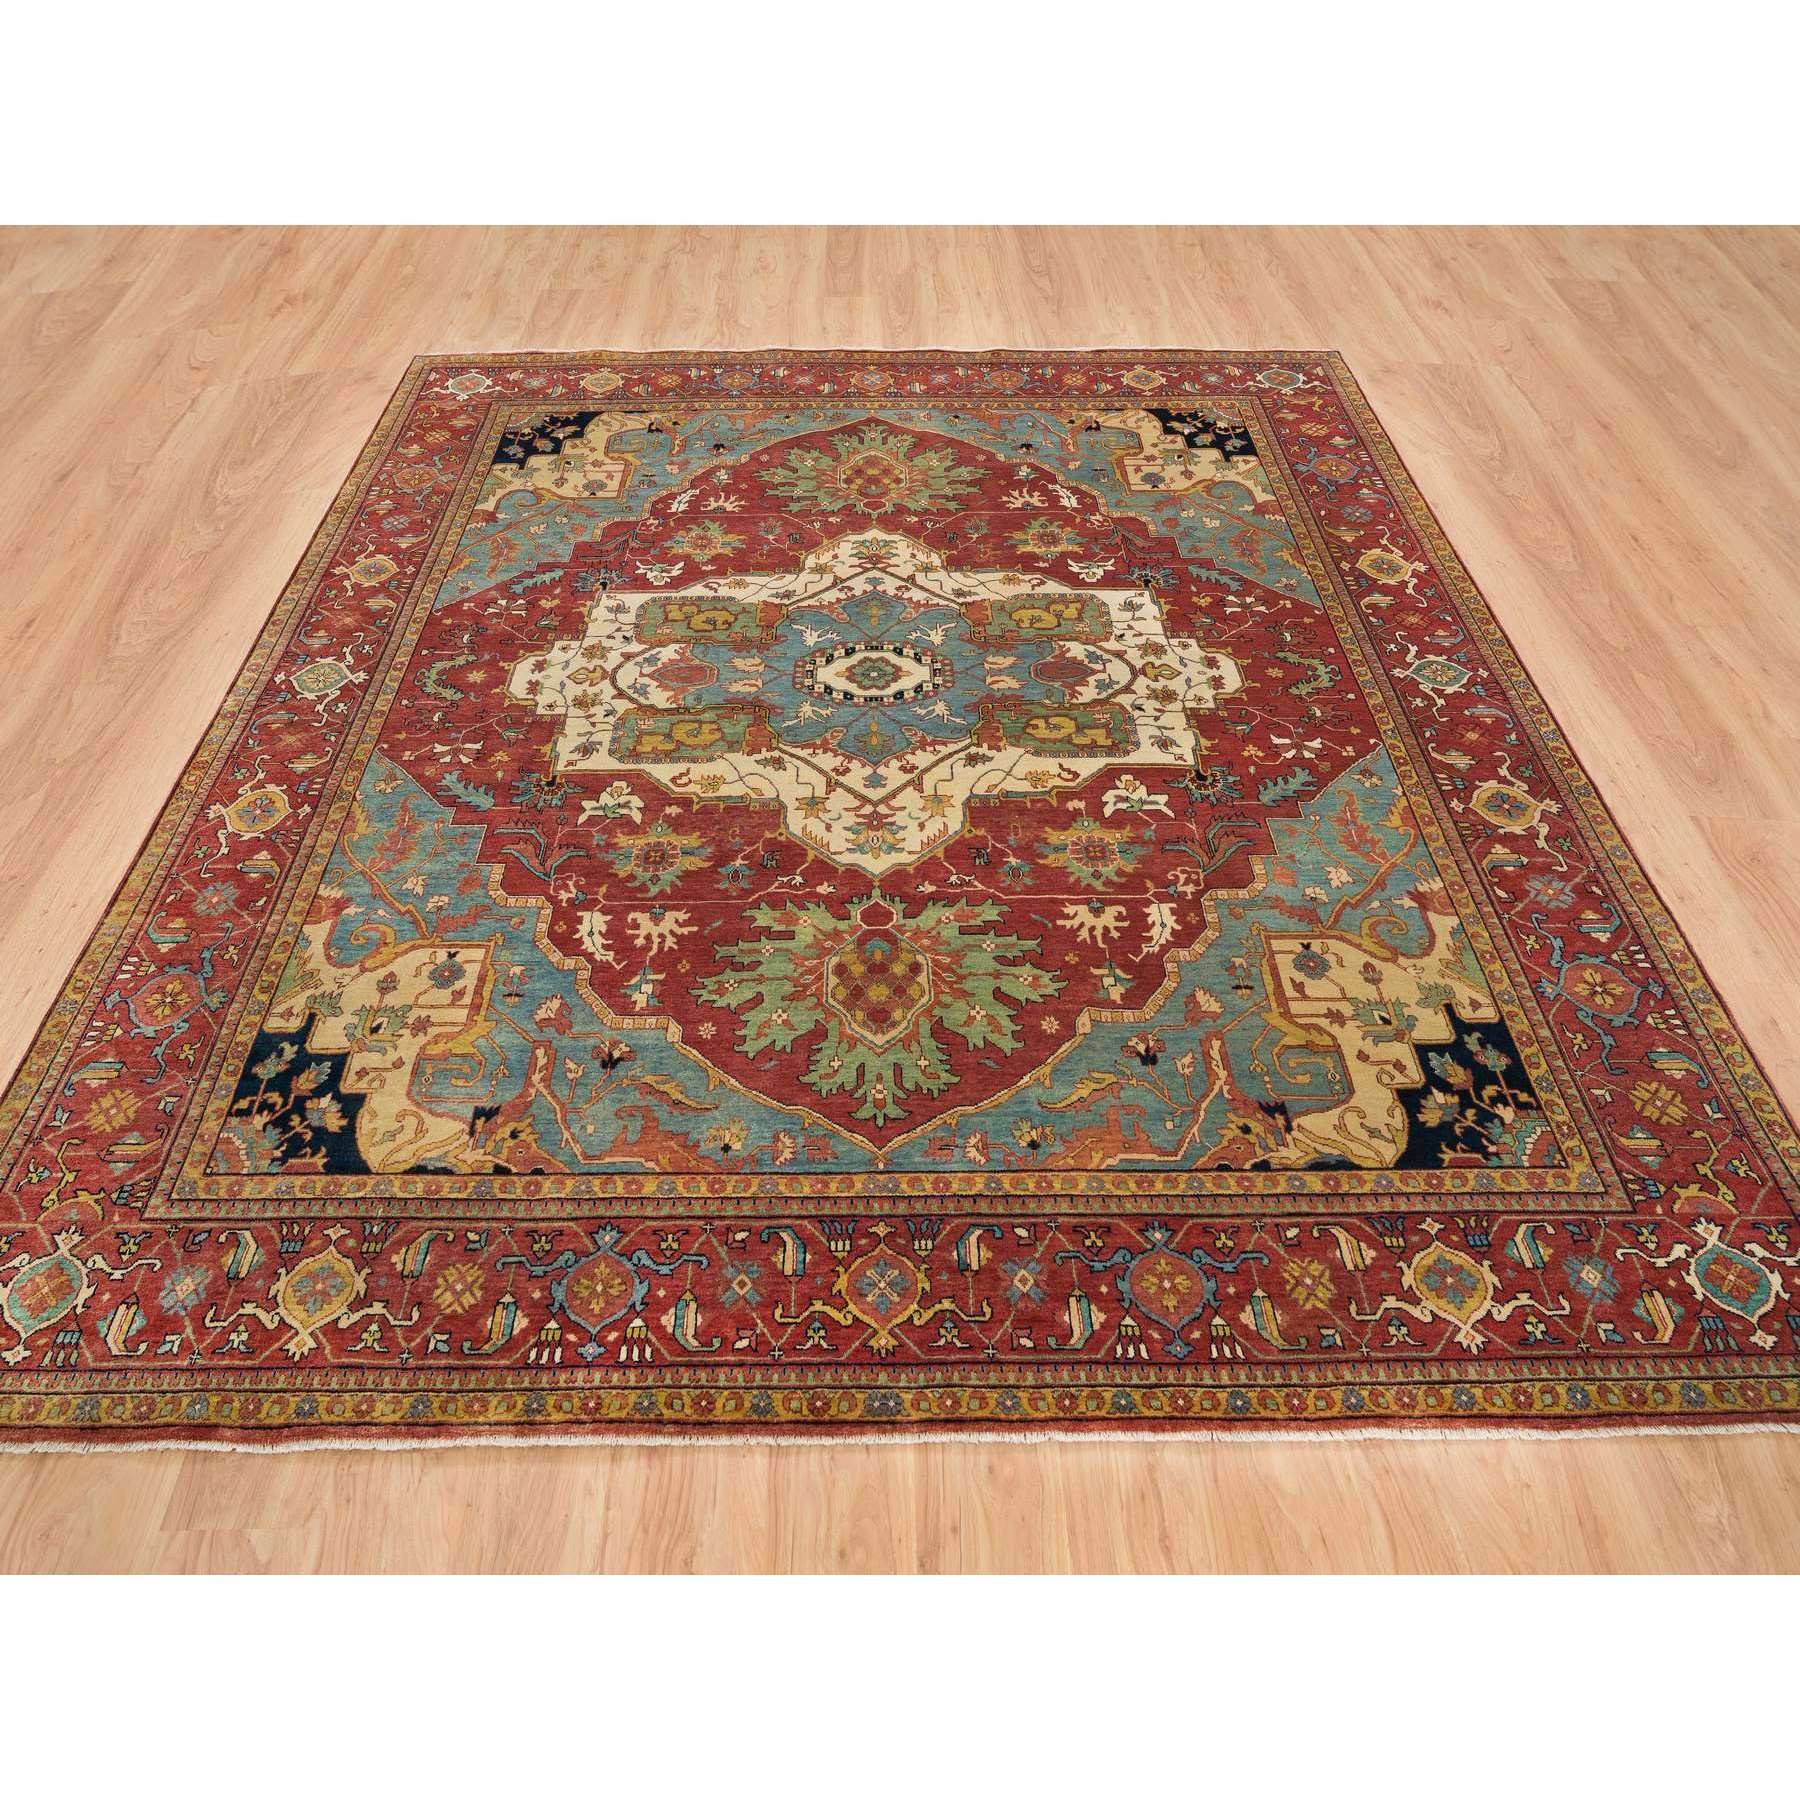  Wool Hand-Knotted Area Rug 9'8